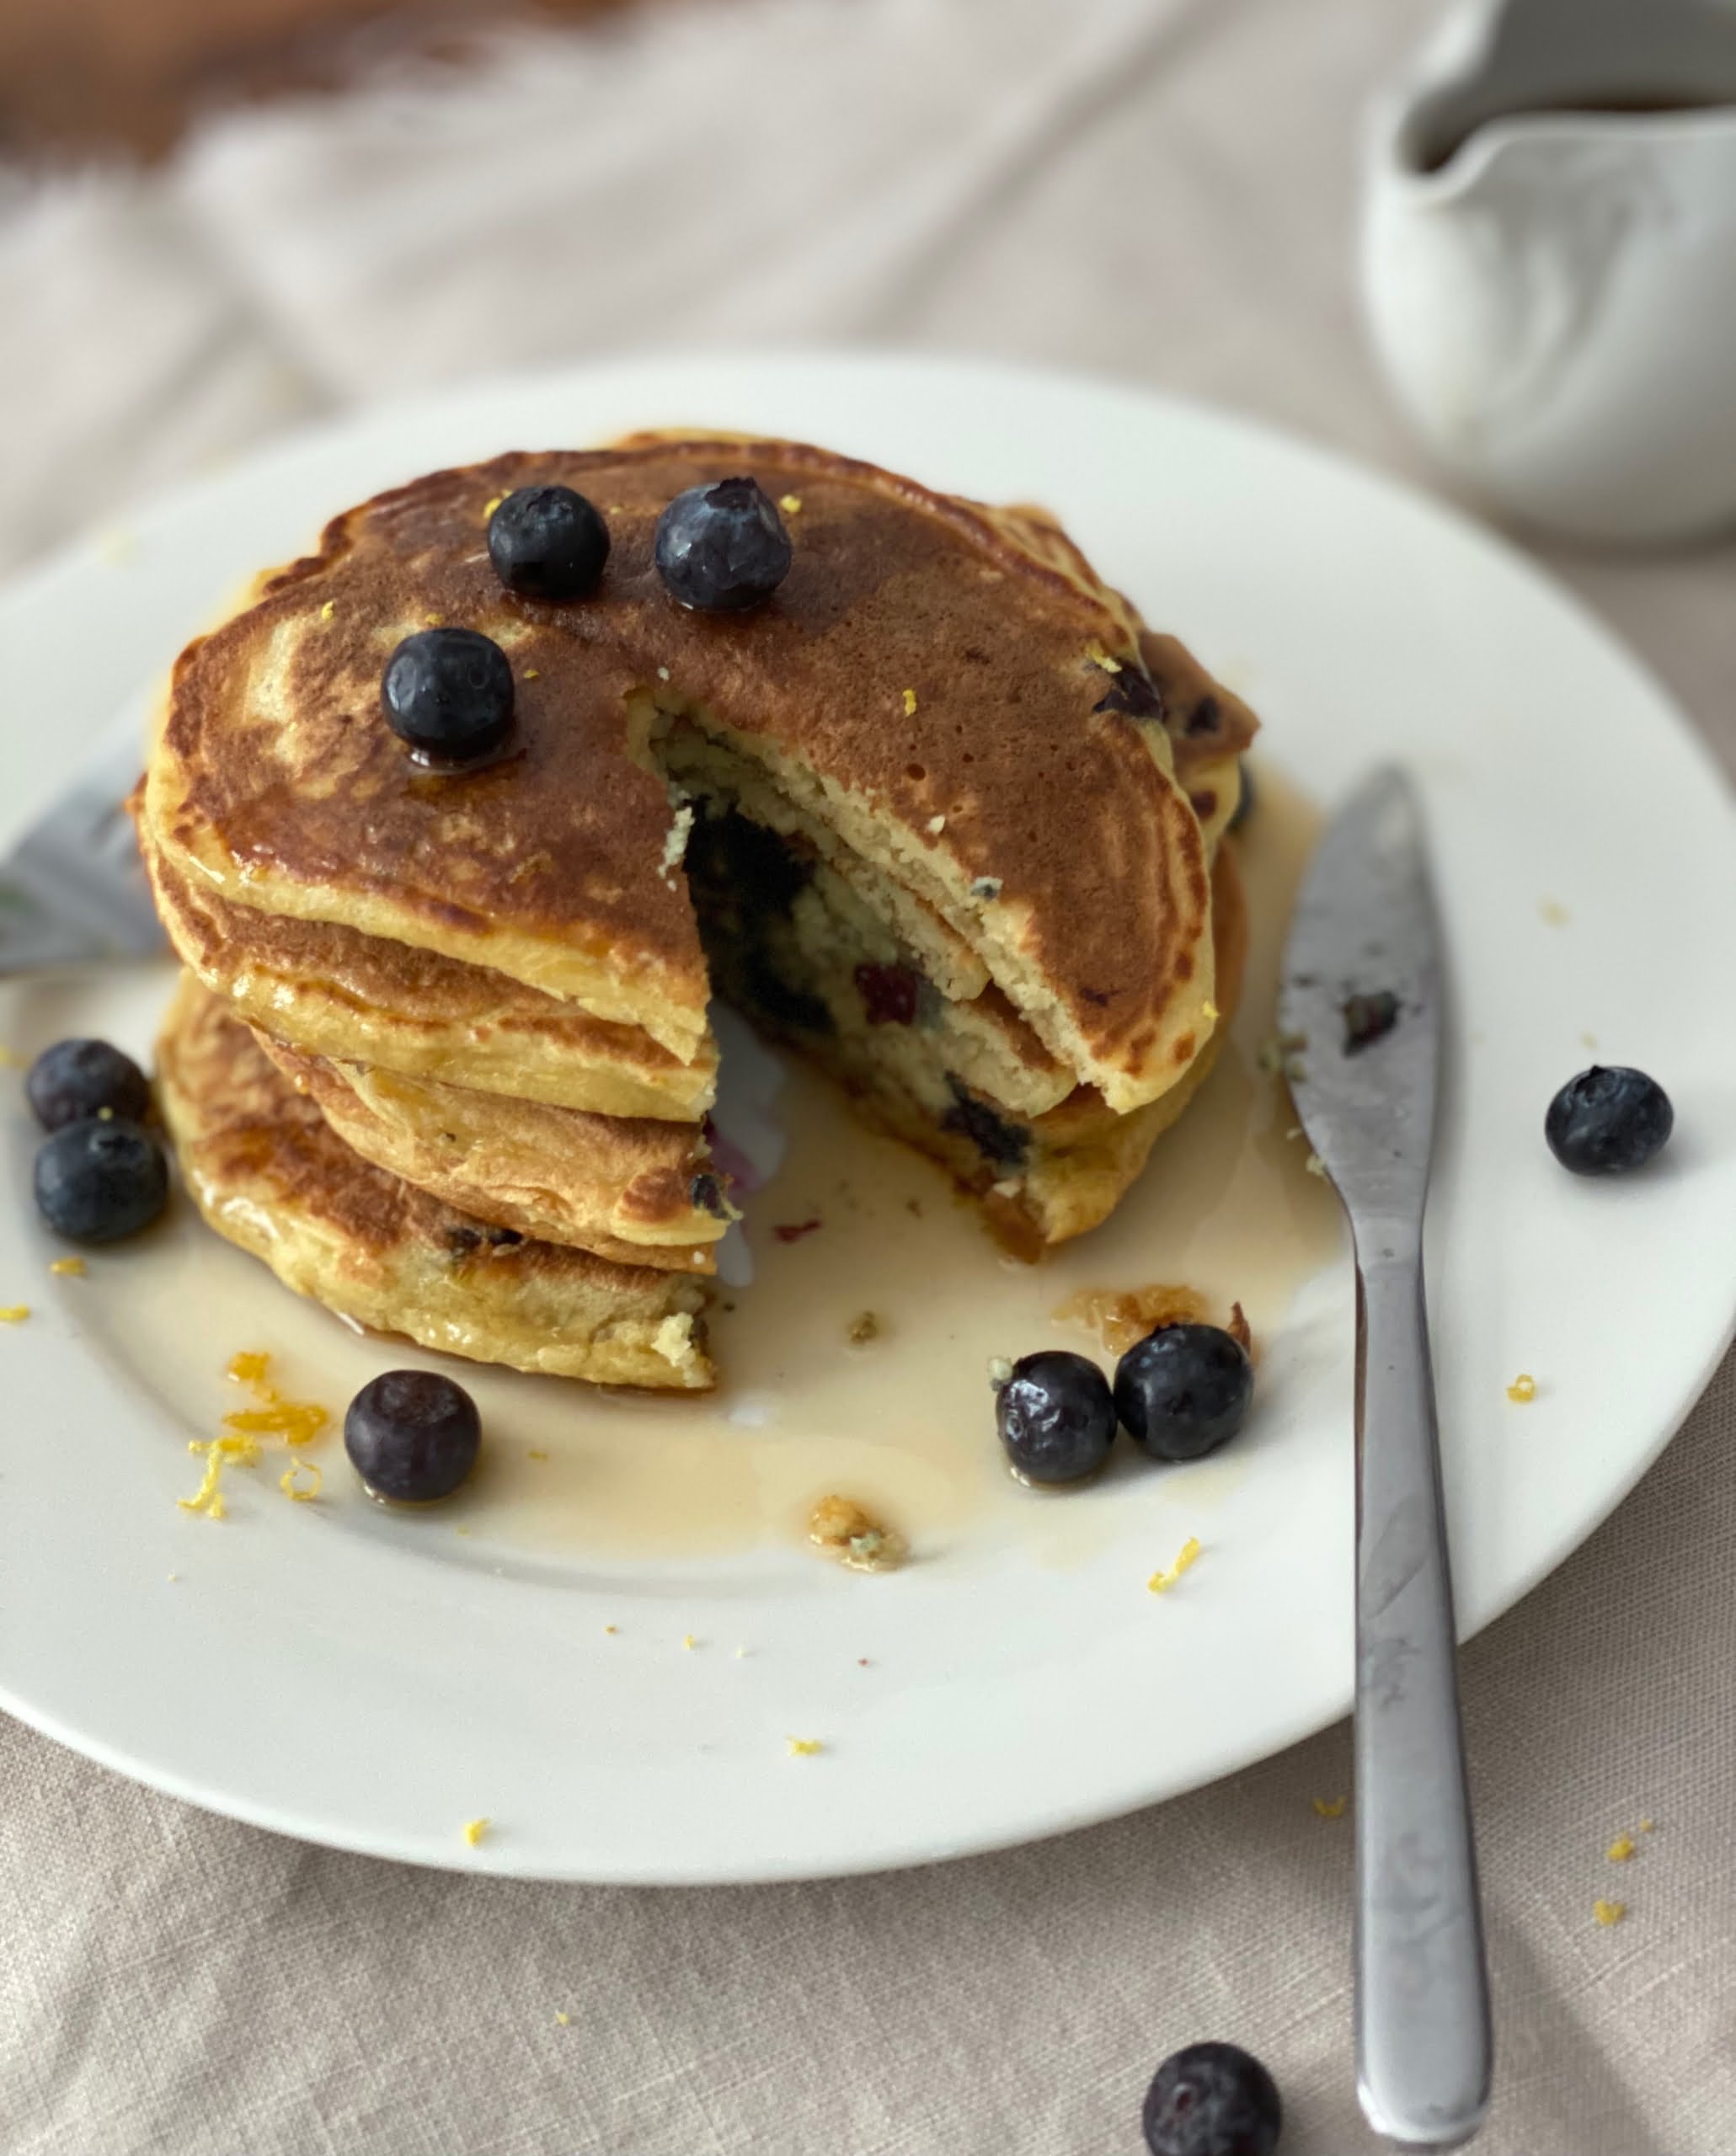 Lemon and Blueberry Ricotta Pancakes with a section cut out - Pure Maple